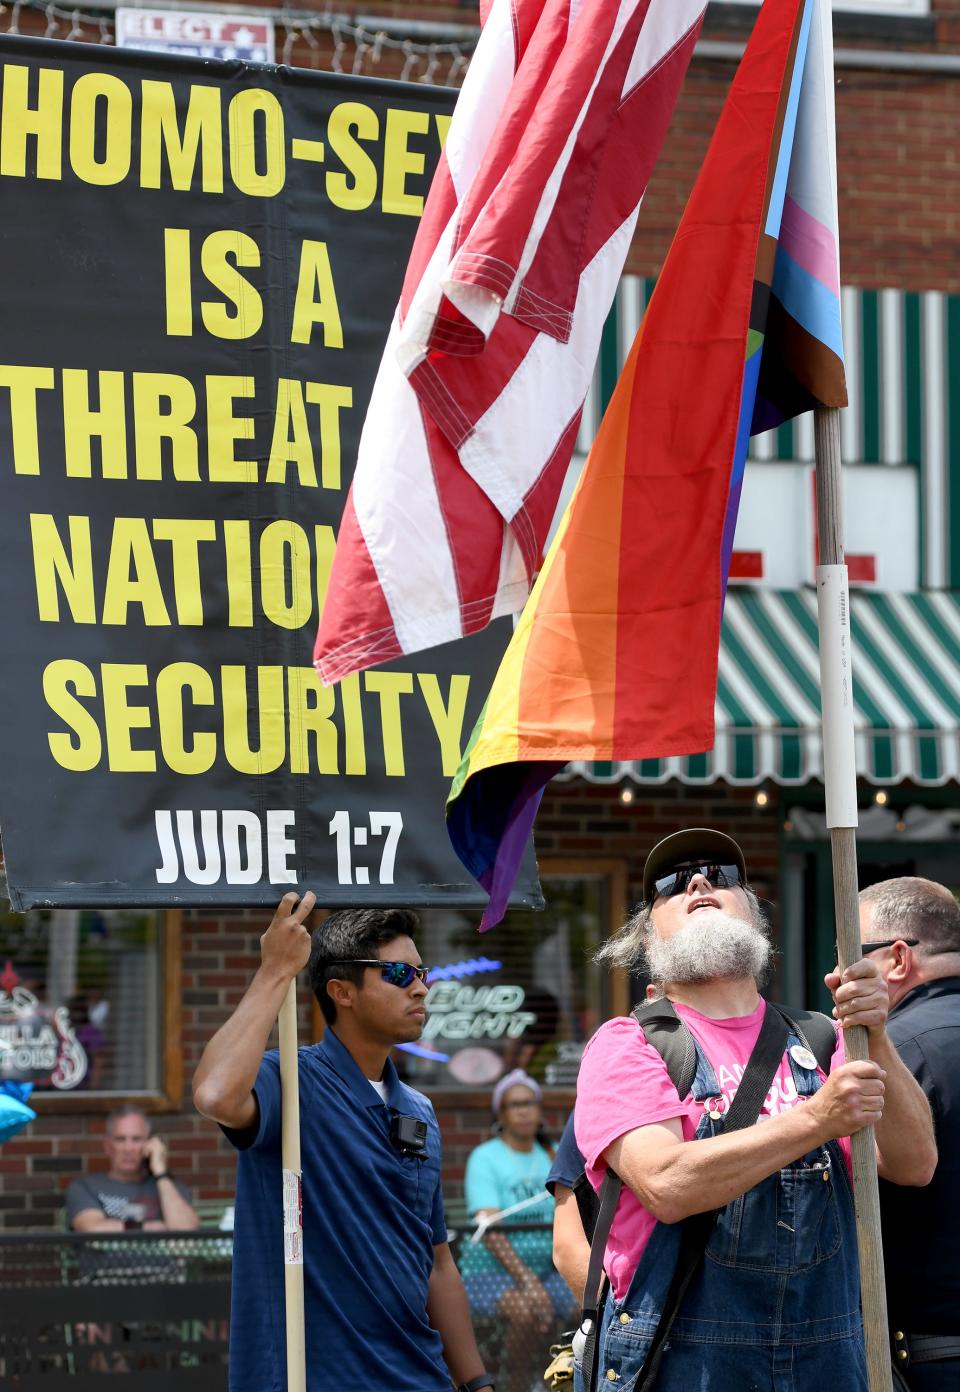 Tony Collins-Sibley of Alliance plants his flags strategically in front of protesters to block their message Saturday as speakers take the stage at the Stark Pride Festival in Canton.